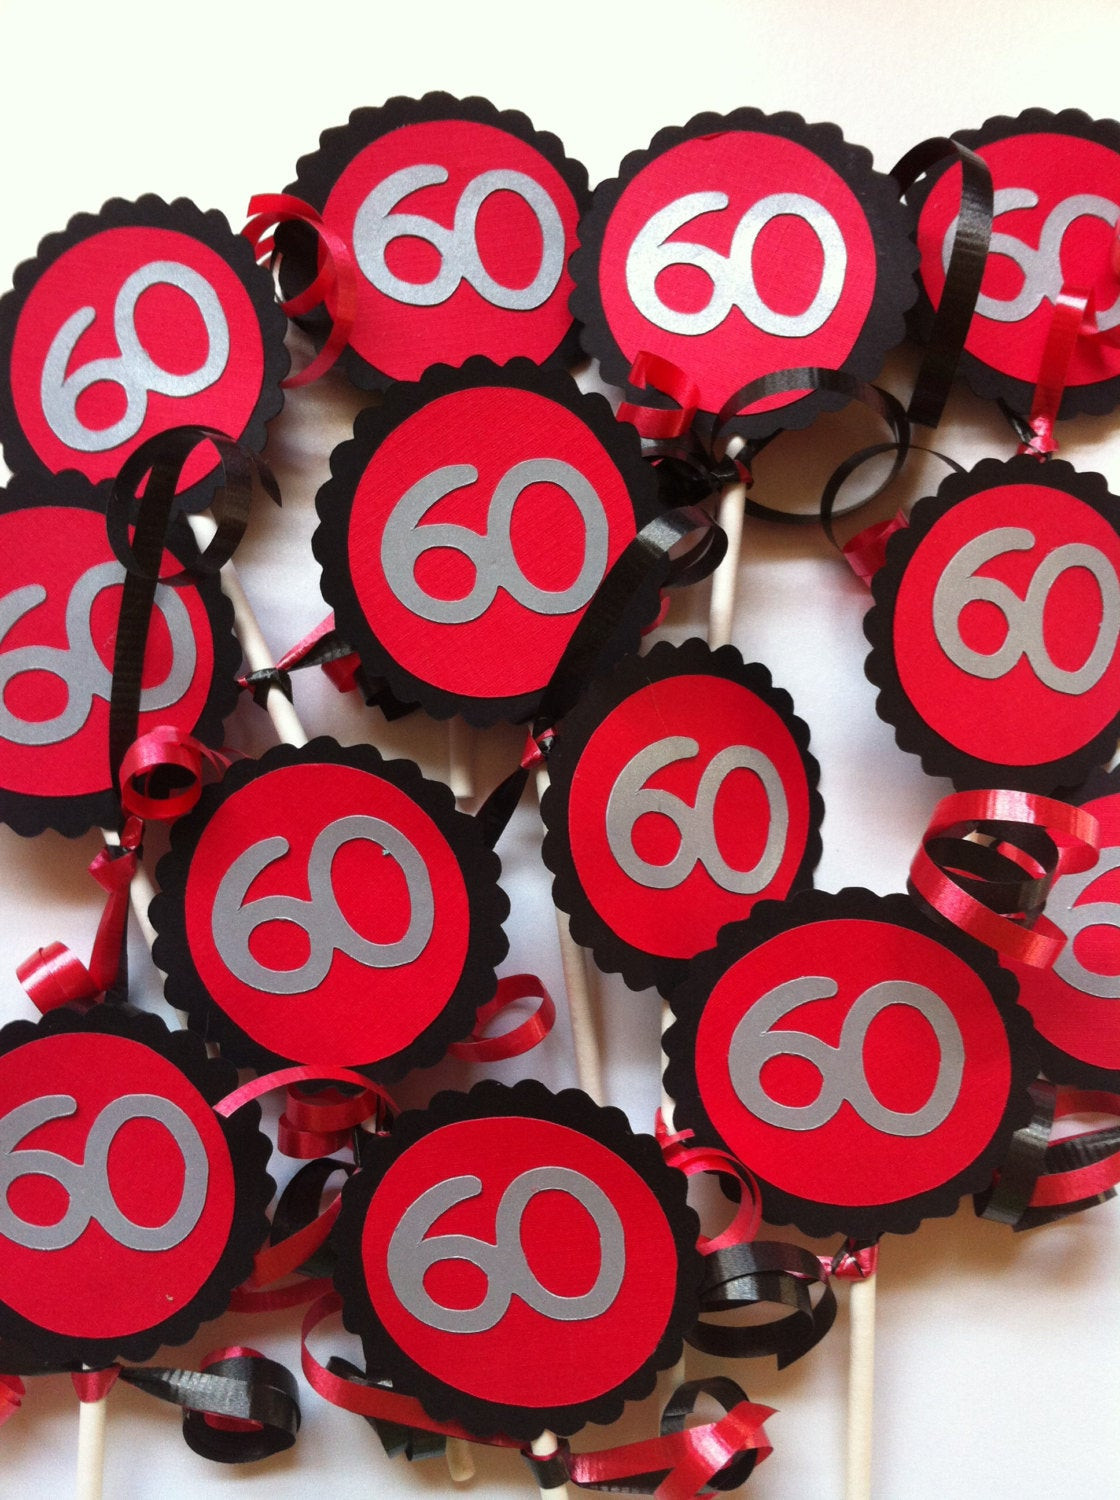 Birthday Cupcake Decorations
 60th Birthday Decorations Cupcake Toppers